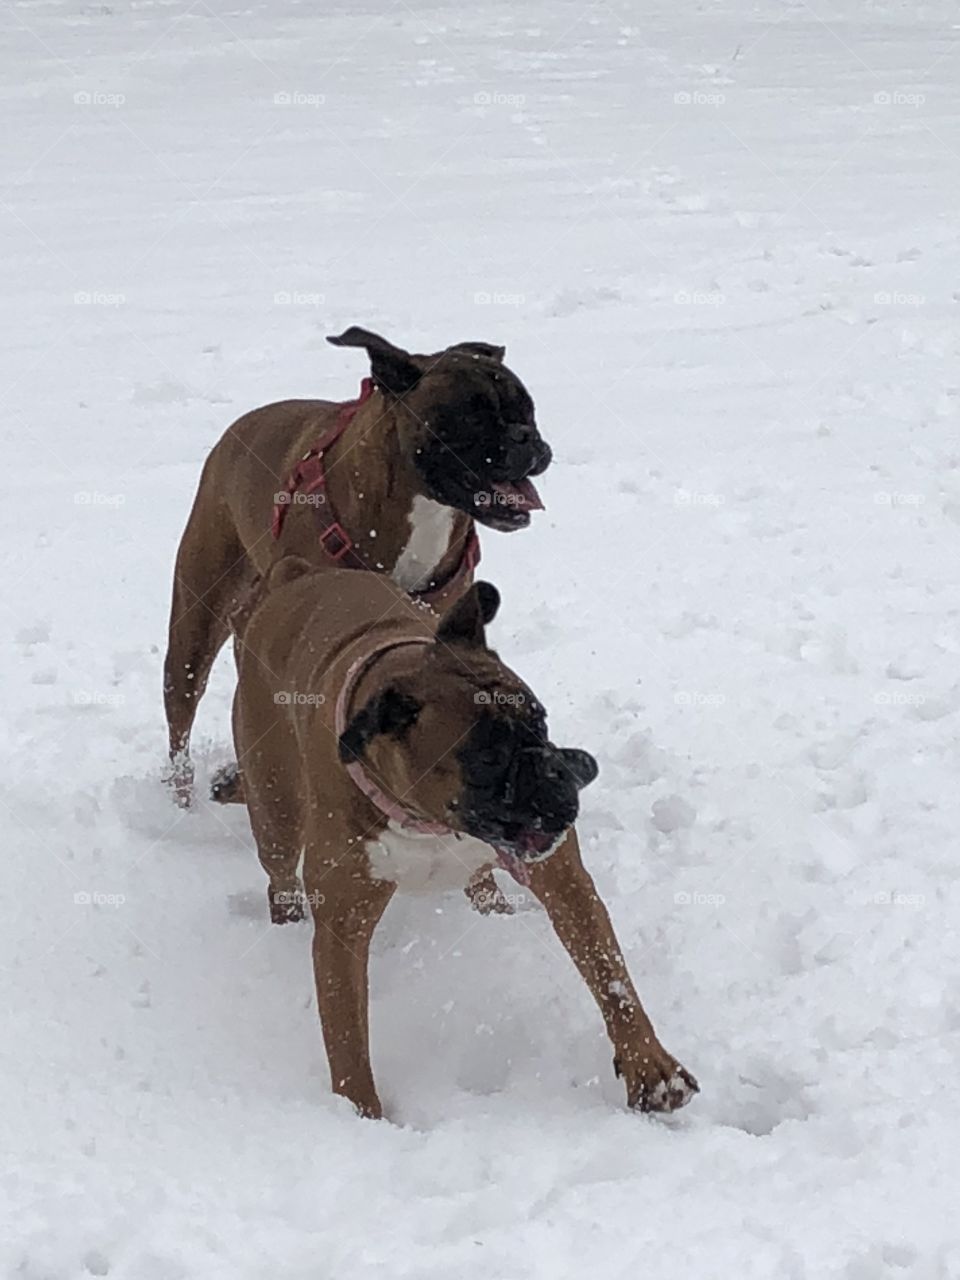 Boxer dogs in the snow having a ball running wild and free.